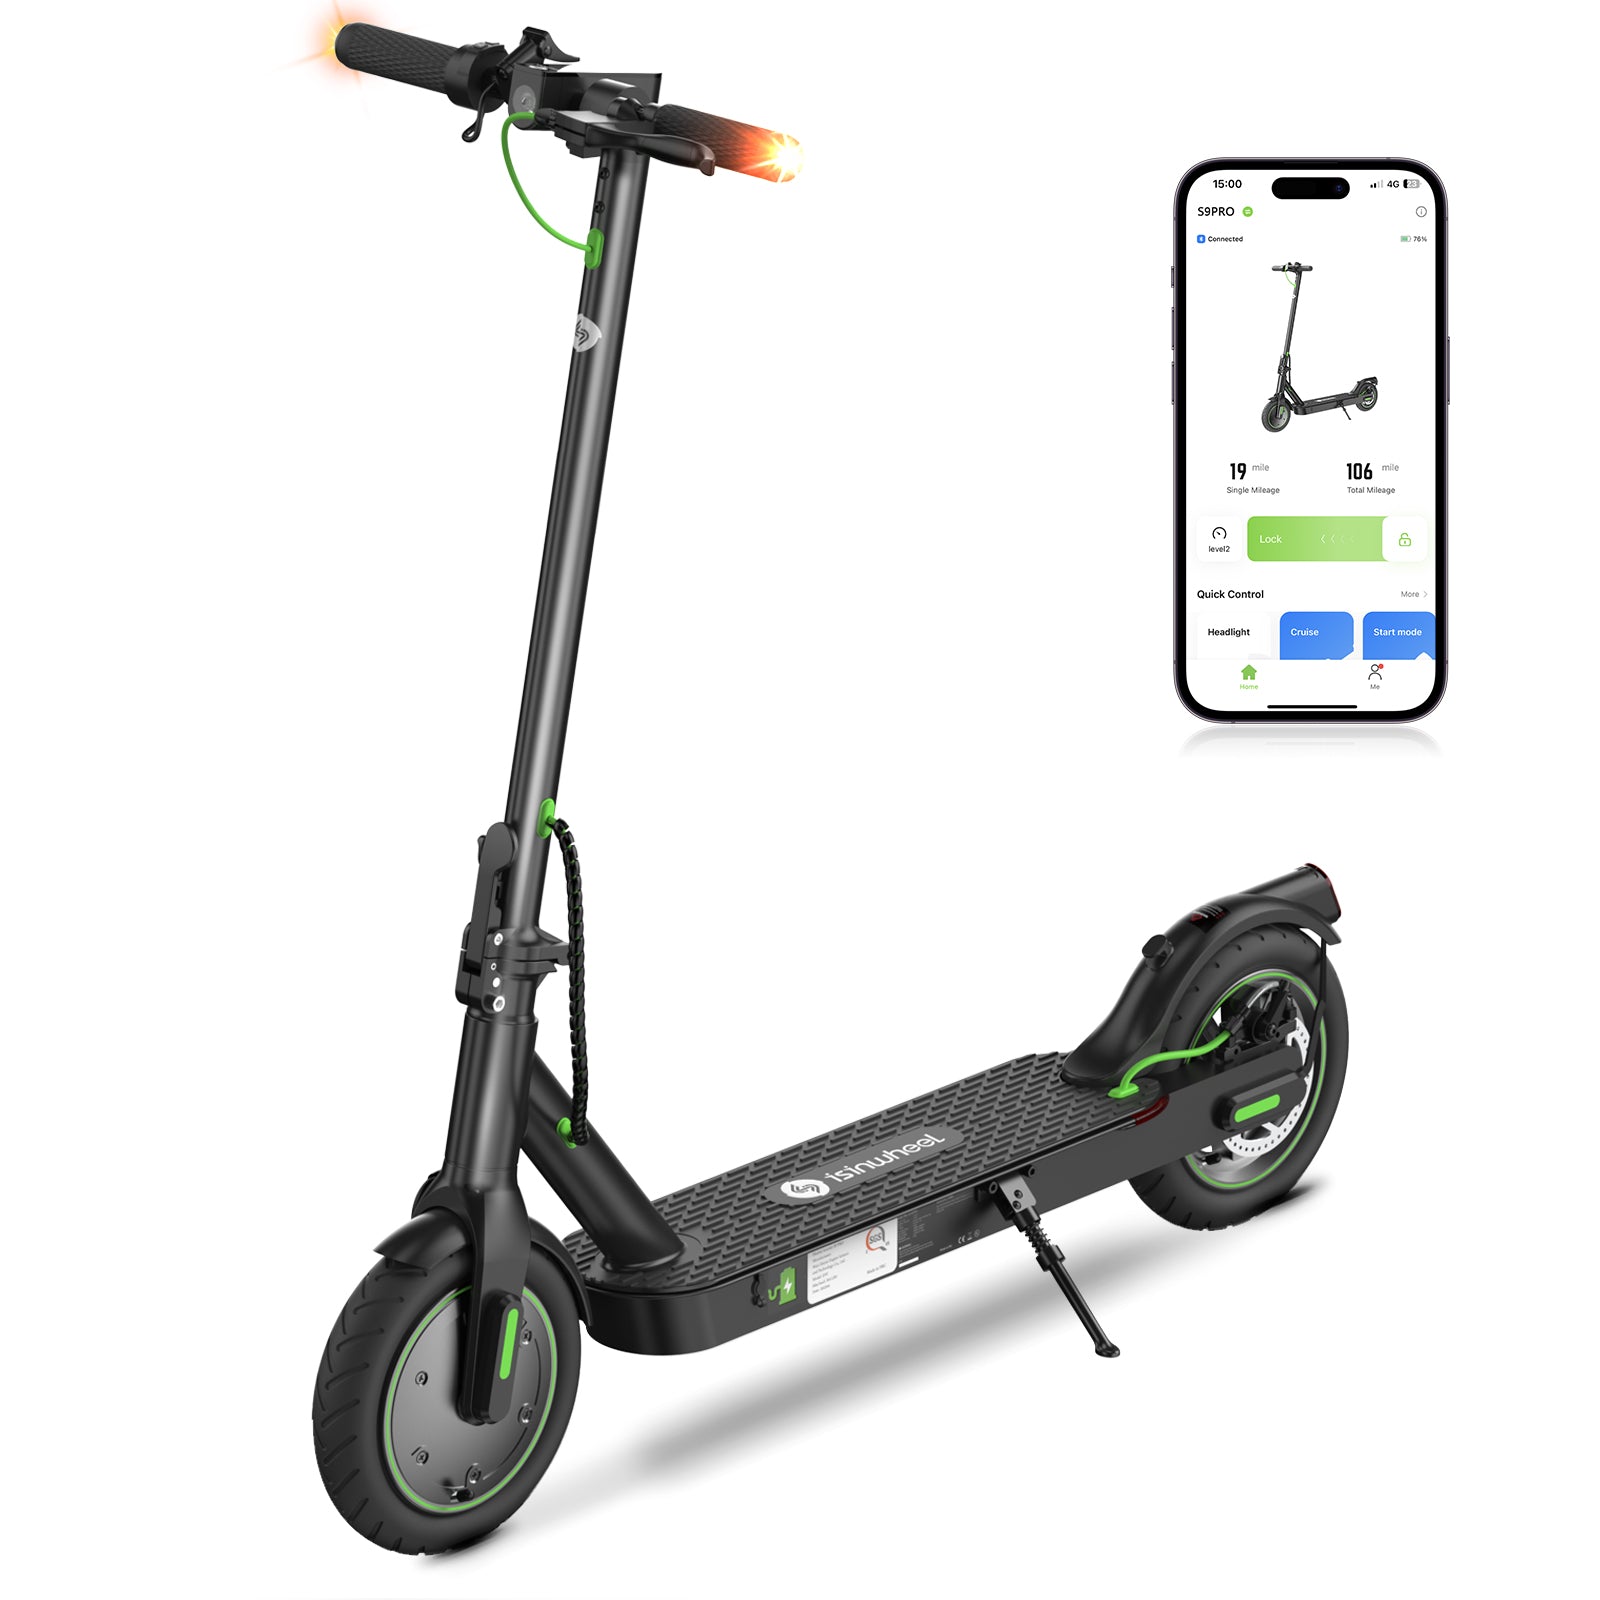 isinwheel S9 Pro Pneumatic Tire Electric Scooter